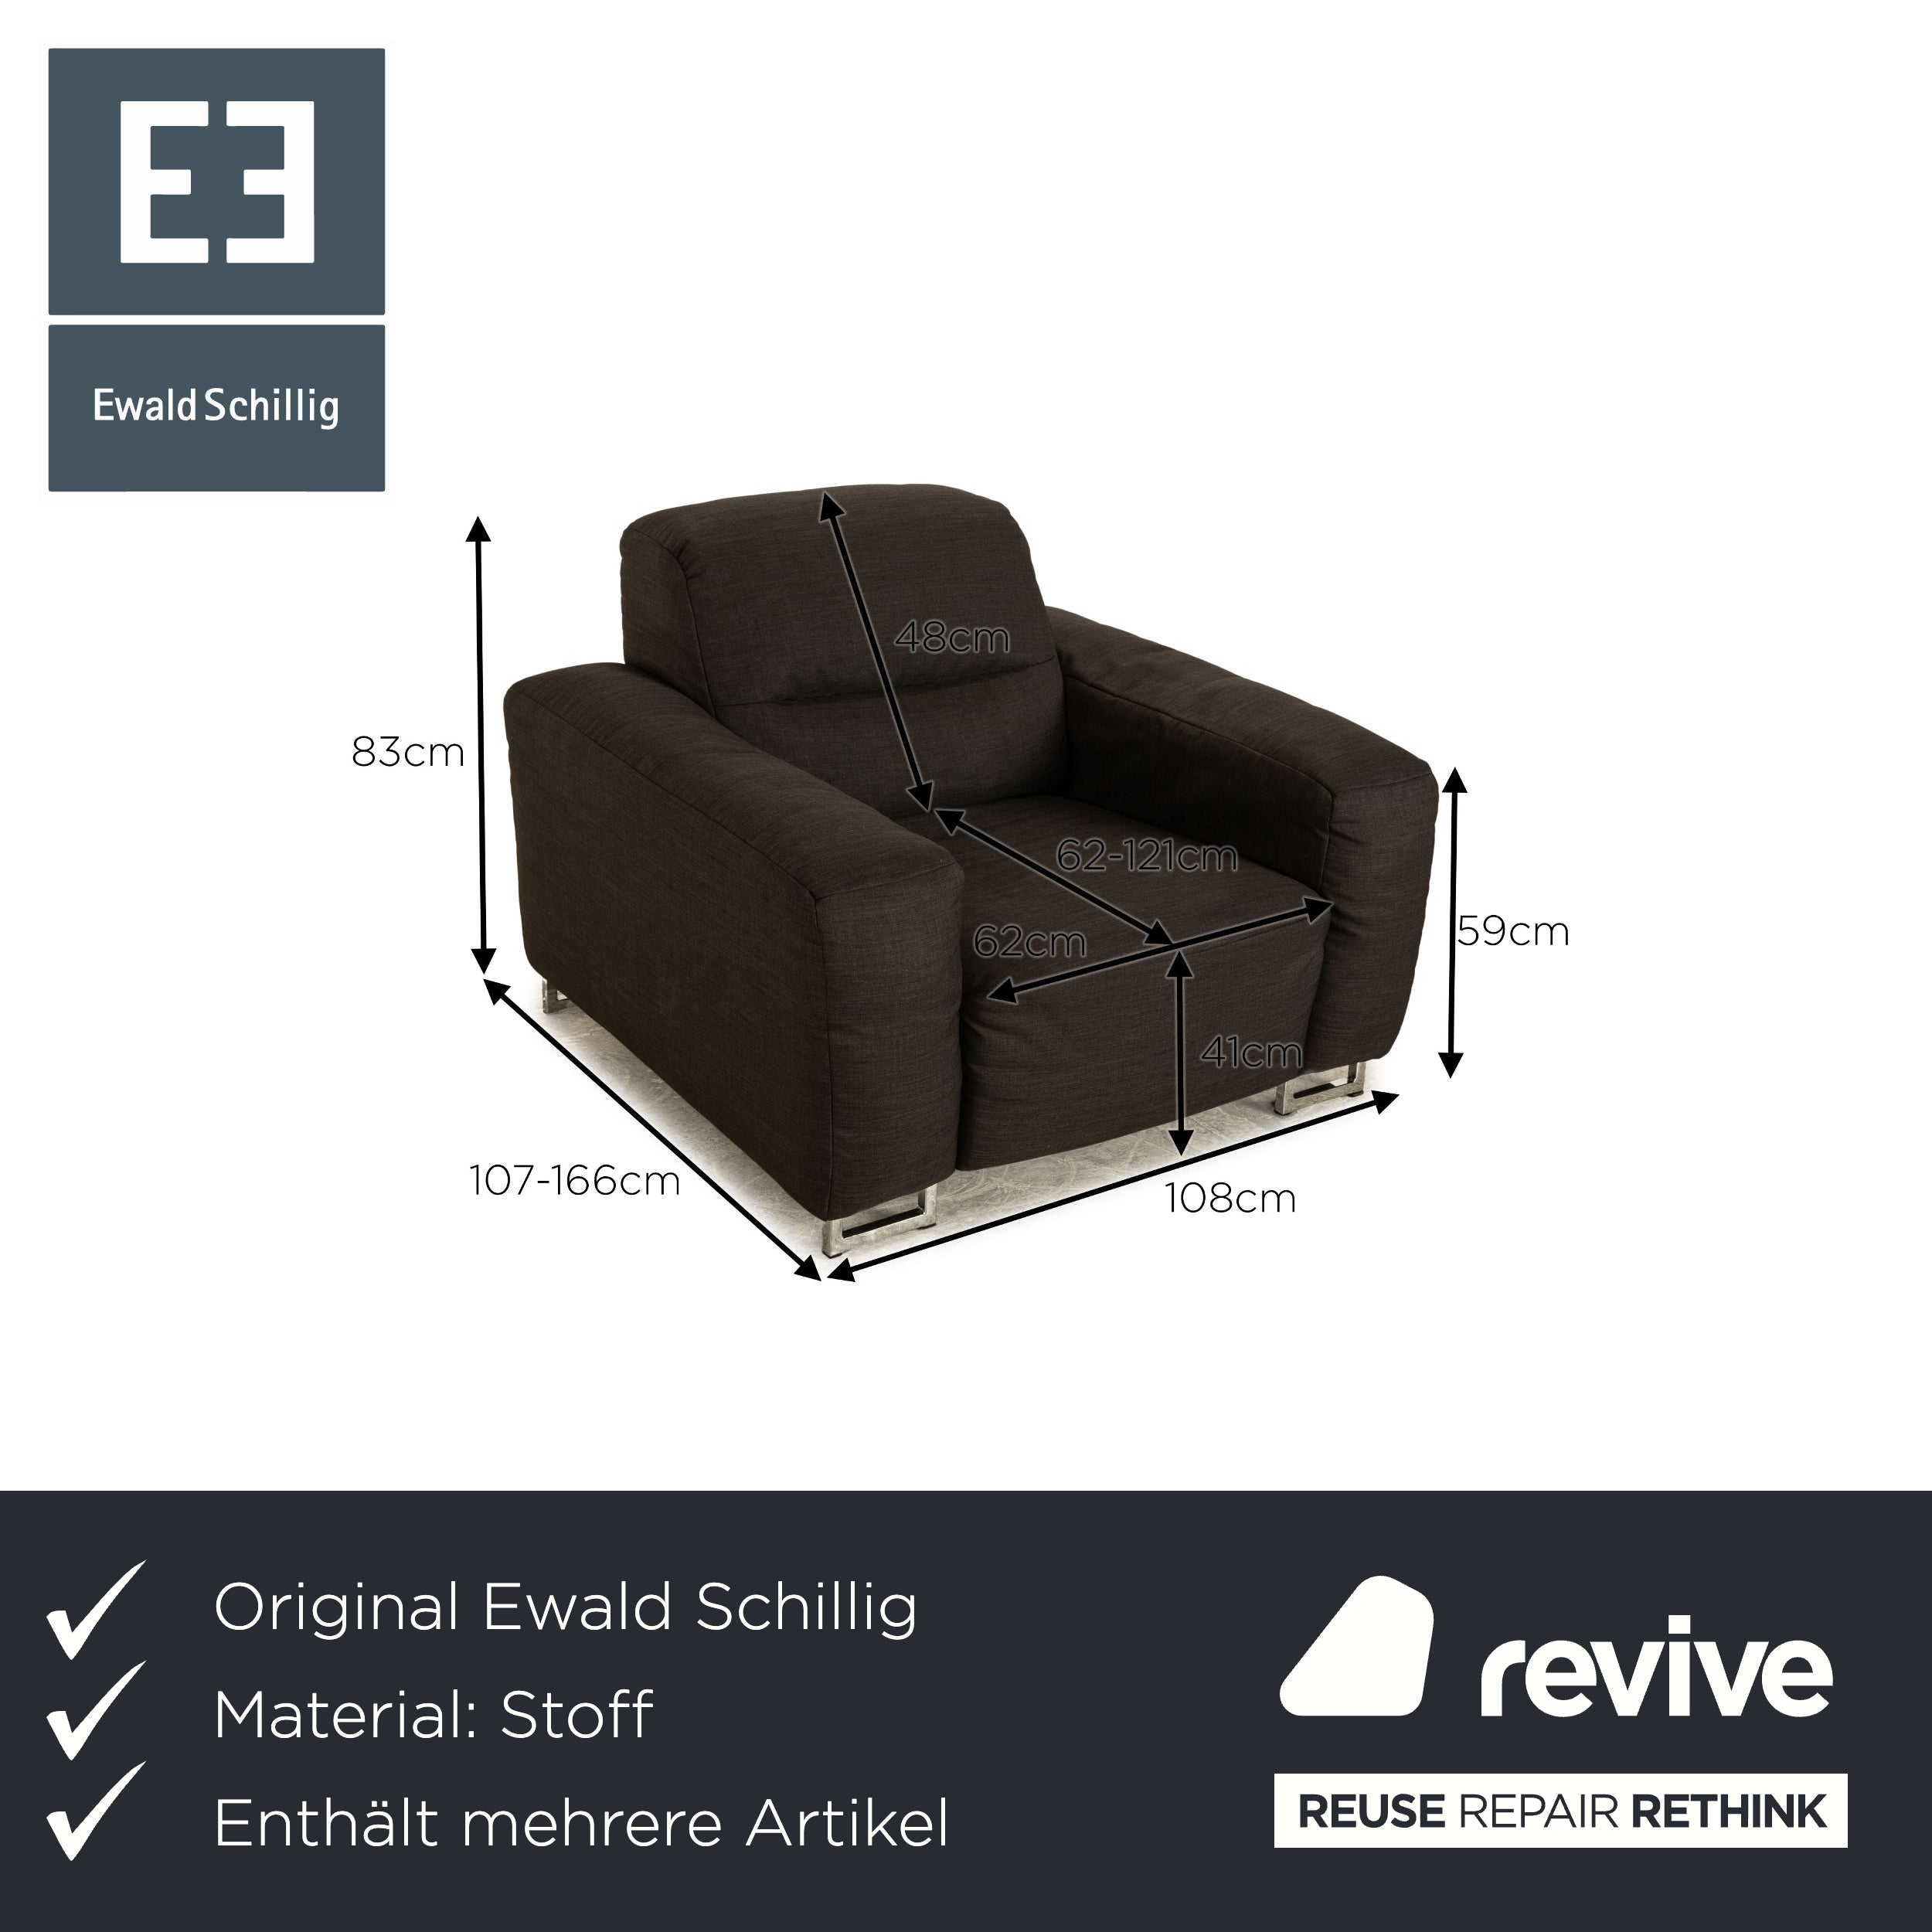 Ewald Schillig fabric armchair set gray electric function relaxation function